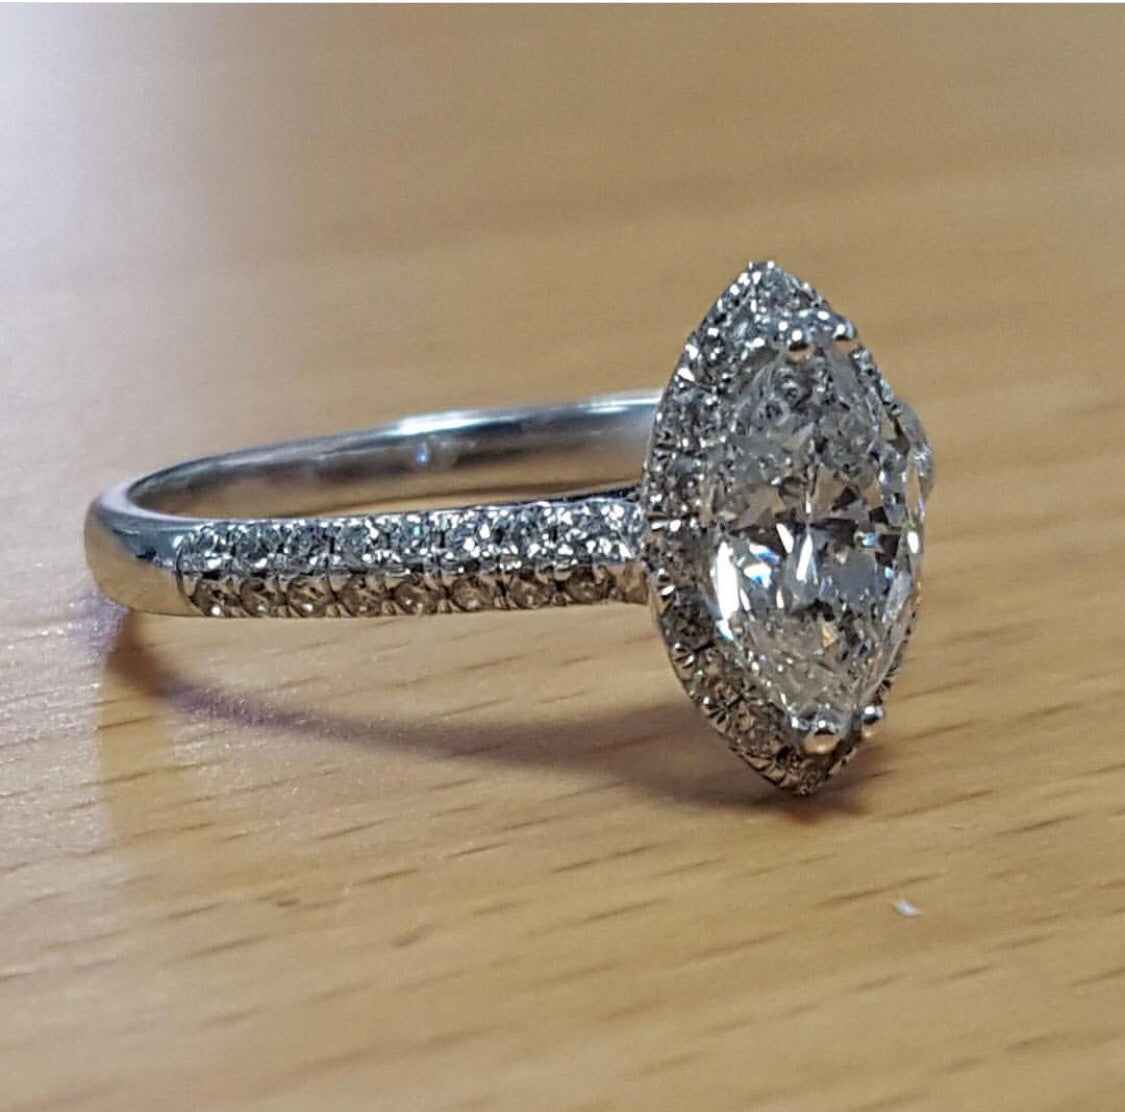 18ct Diamond Ring 1.24ct Certificated - Hallmark Jewellers Formby & The Jewellers Bench Widnes